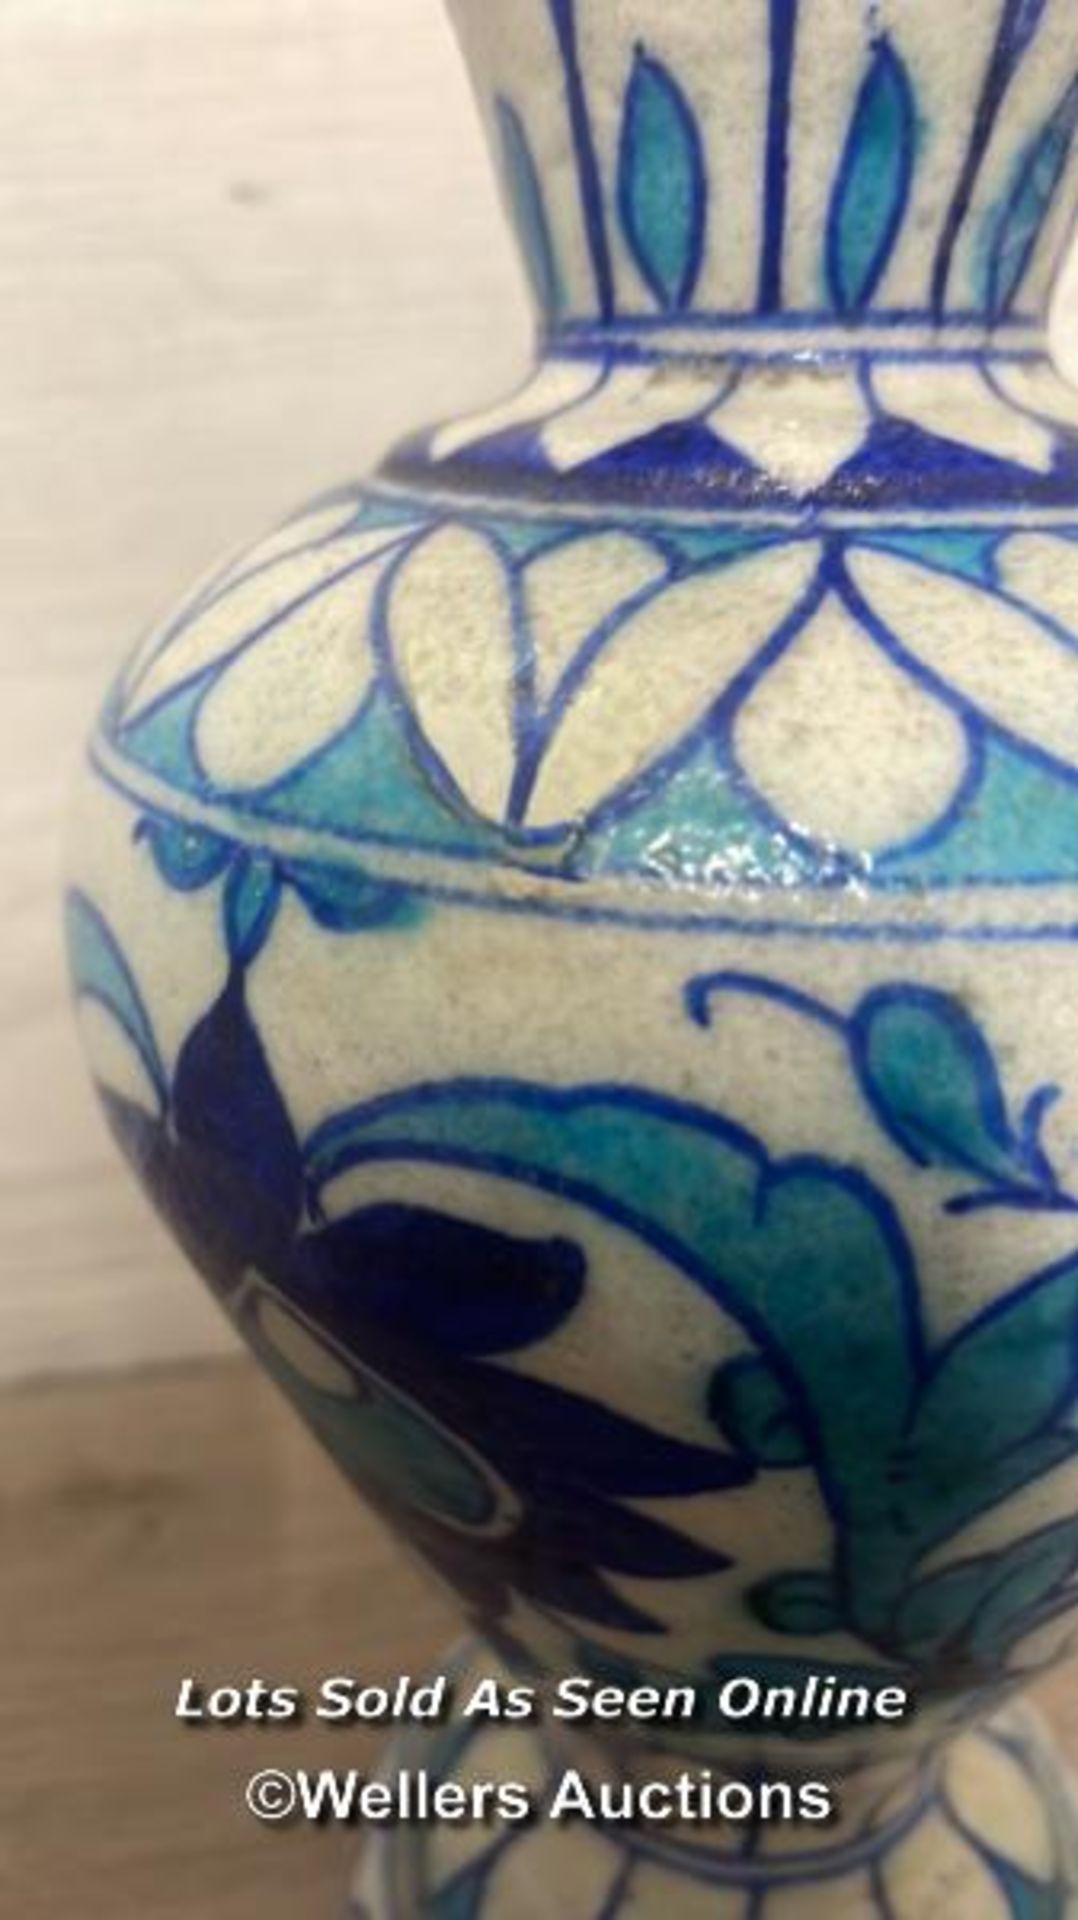 TWO SIMILAR MULTAN POTTERY VASES FROM PAKISTAN, HAND PAINTED BLUE & TURQUOISE FOLIAGE AND FLOWER - Image 10 of 15